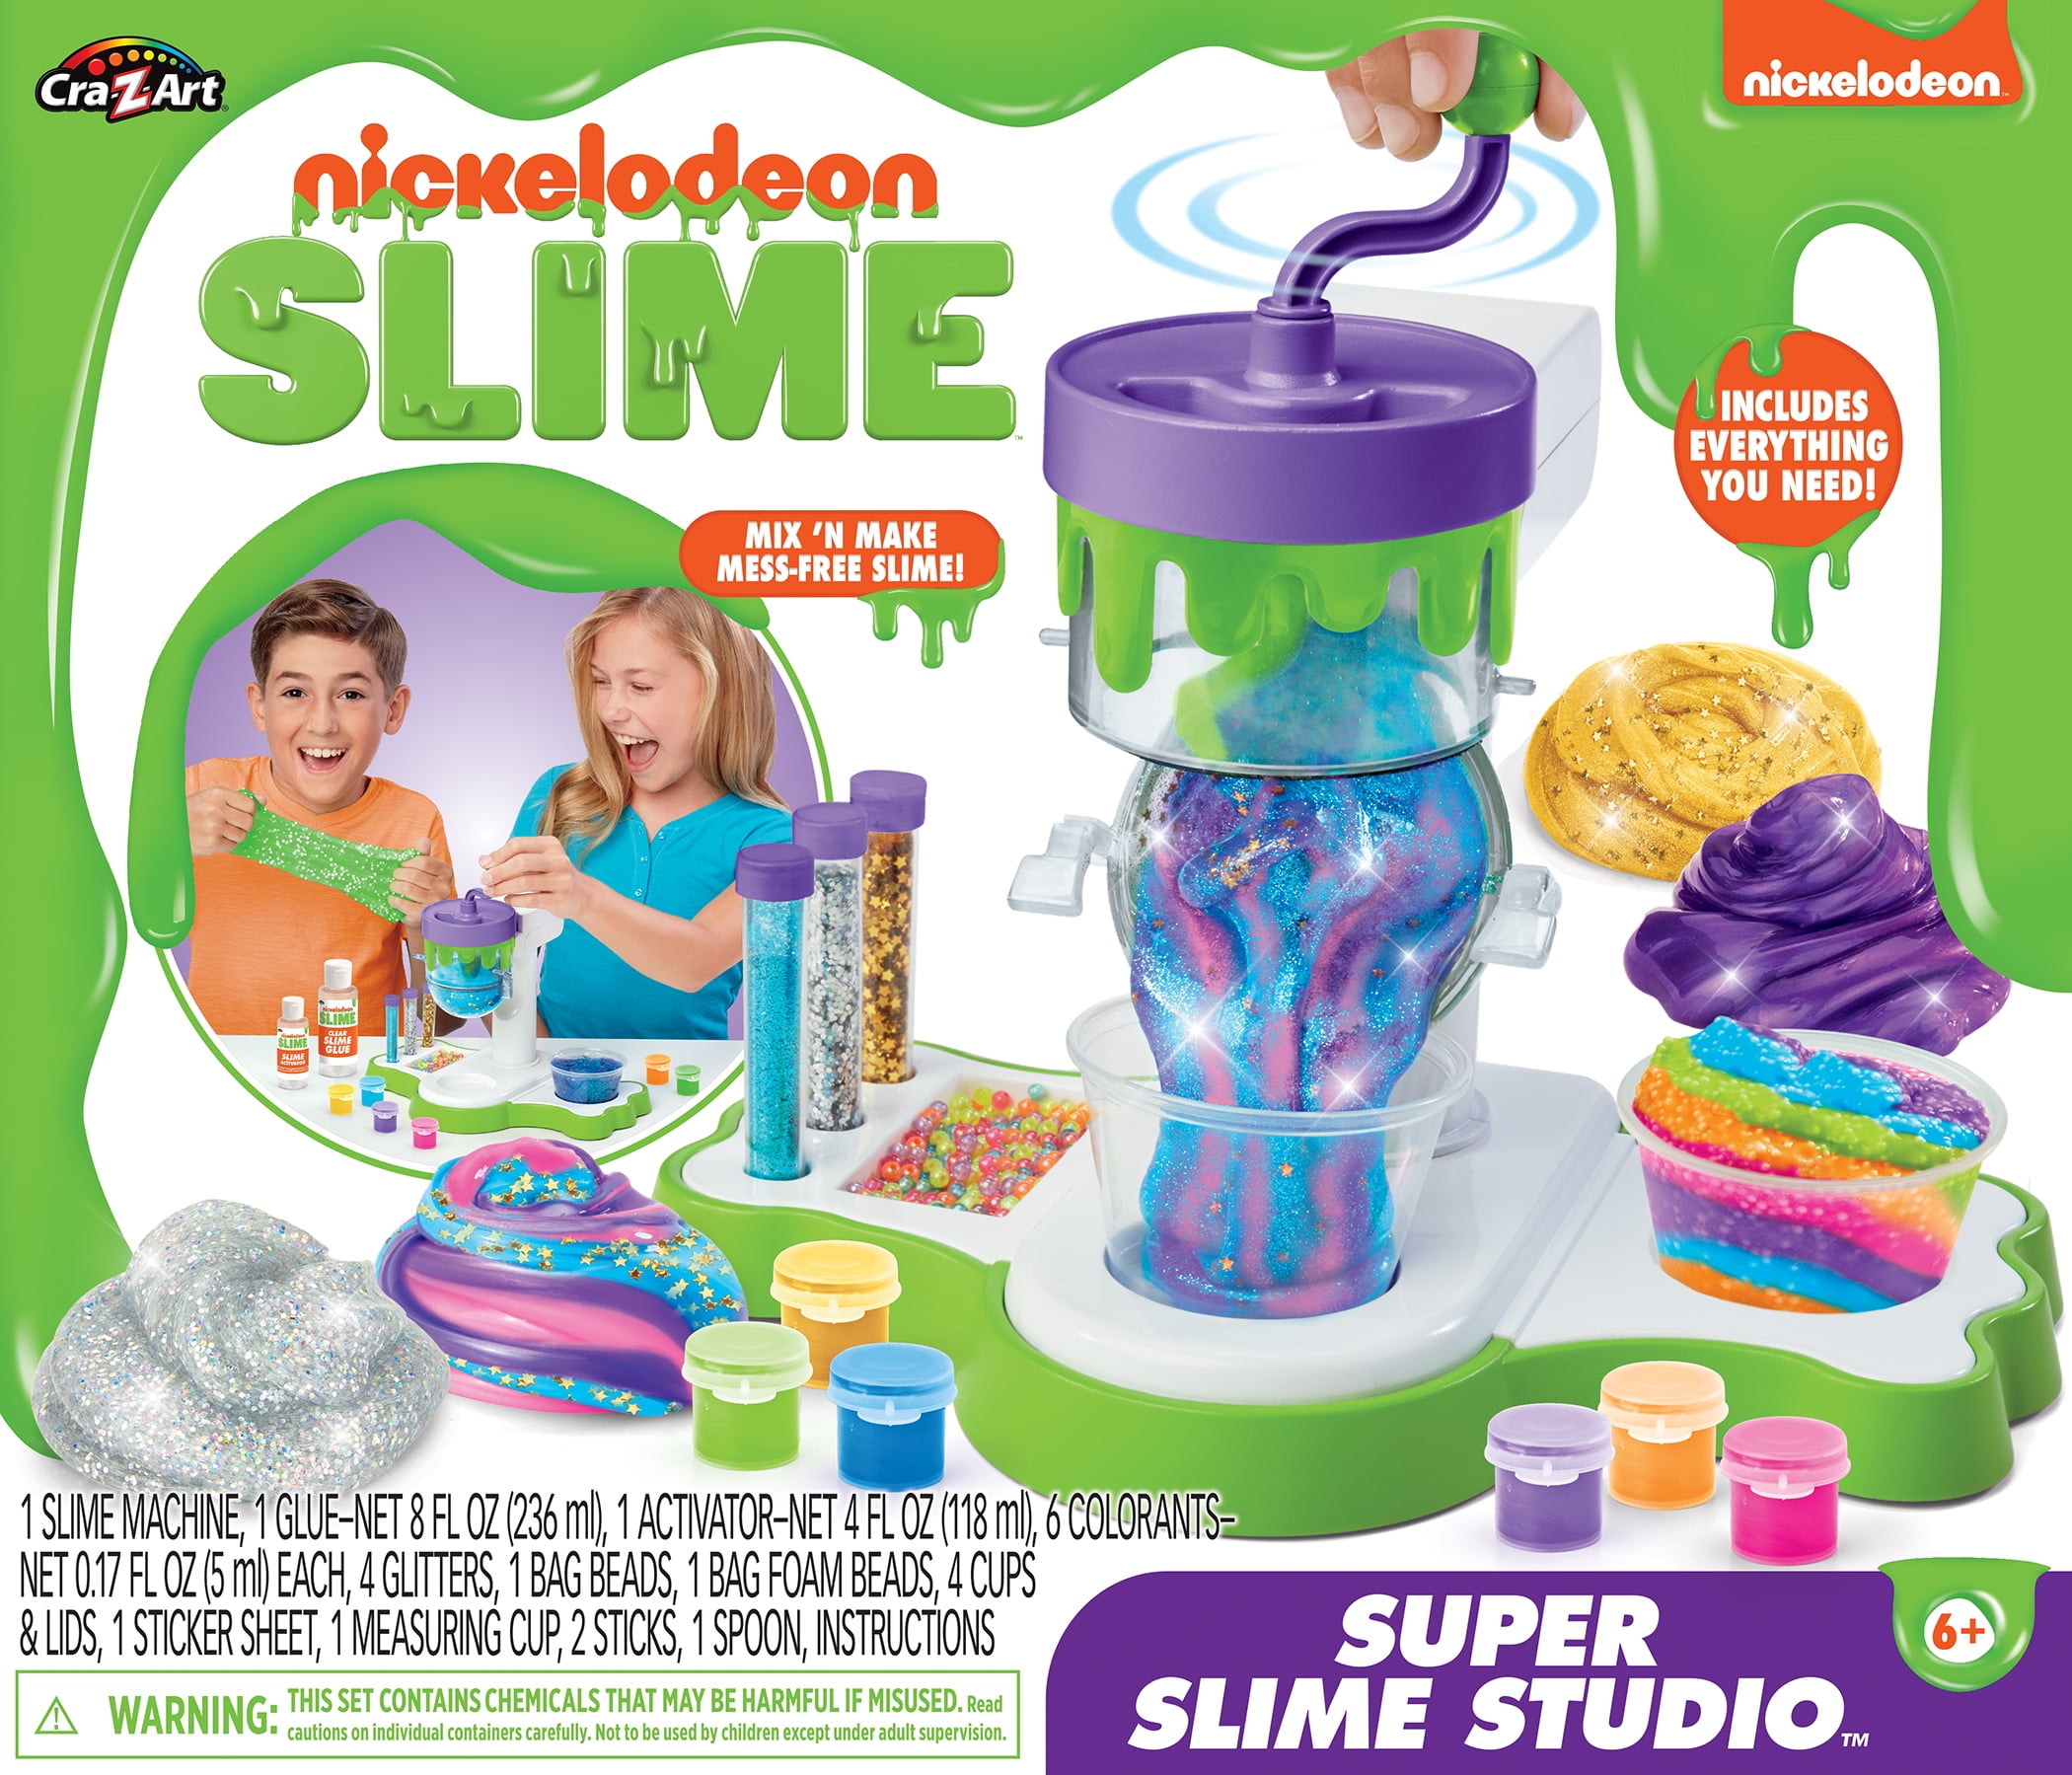 Cra-Z-Art - Nickleodeon Ultimate Slime Making Lab with Tabletop Mixer